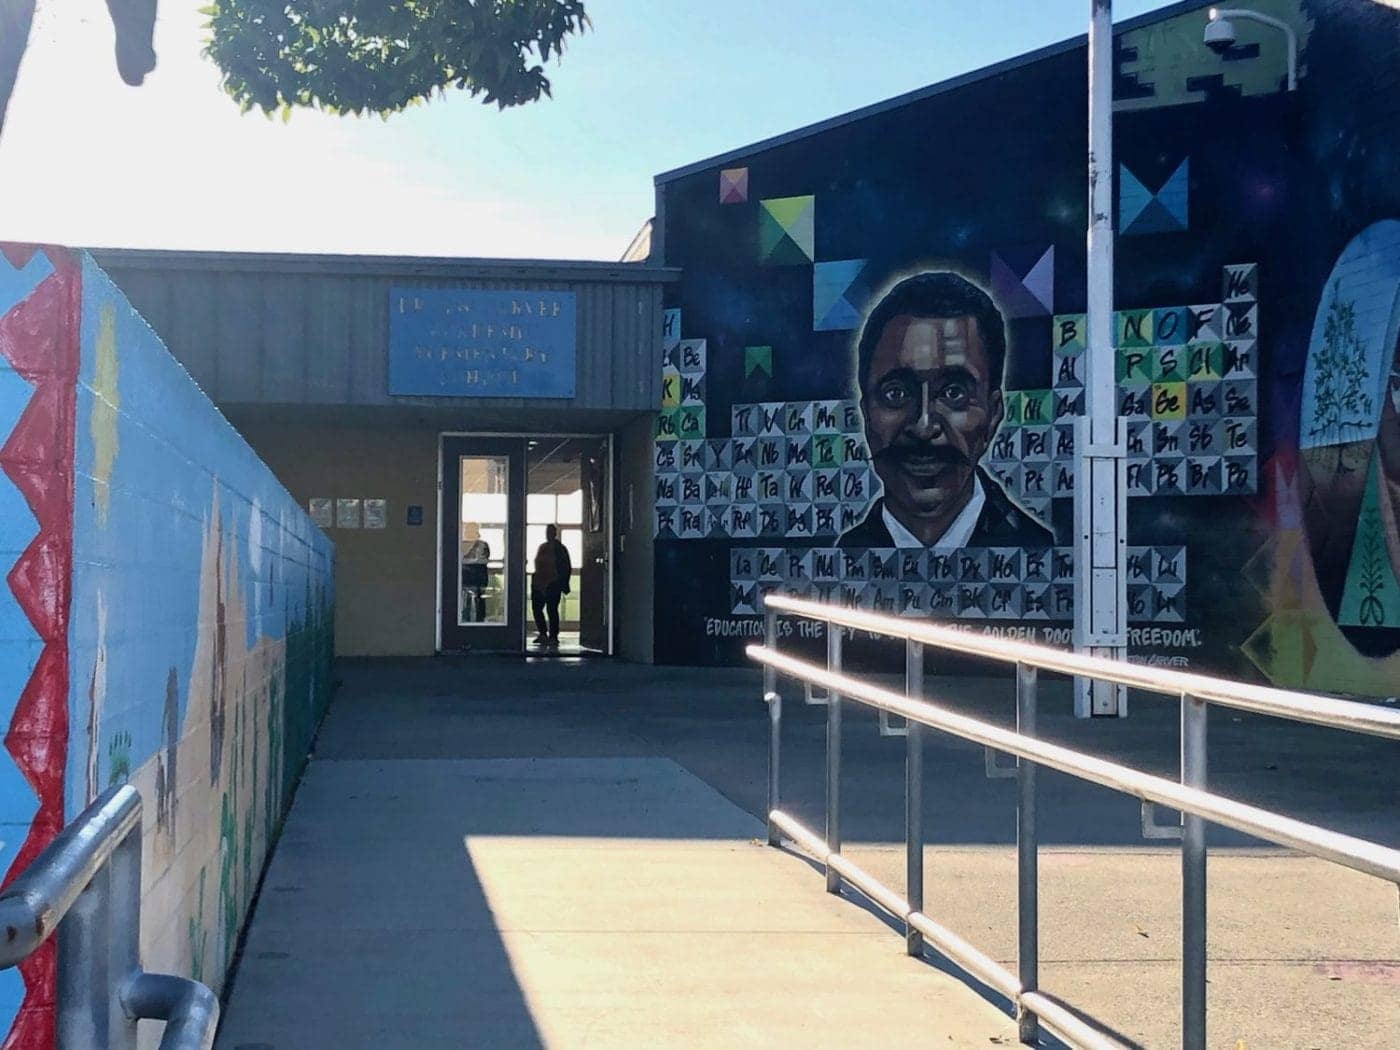 Dr.-George-Washington-Carver-Elementary-School-by-Sophia-Chupein-091322-1400x1050, <strong>Pandemic ripple effects still apparent in Bayview schools</strong>, Local News & Views News & Views 